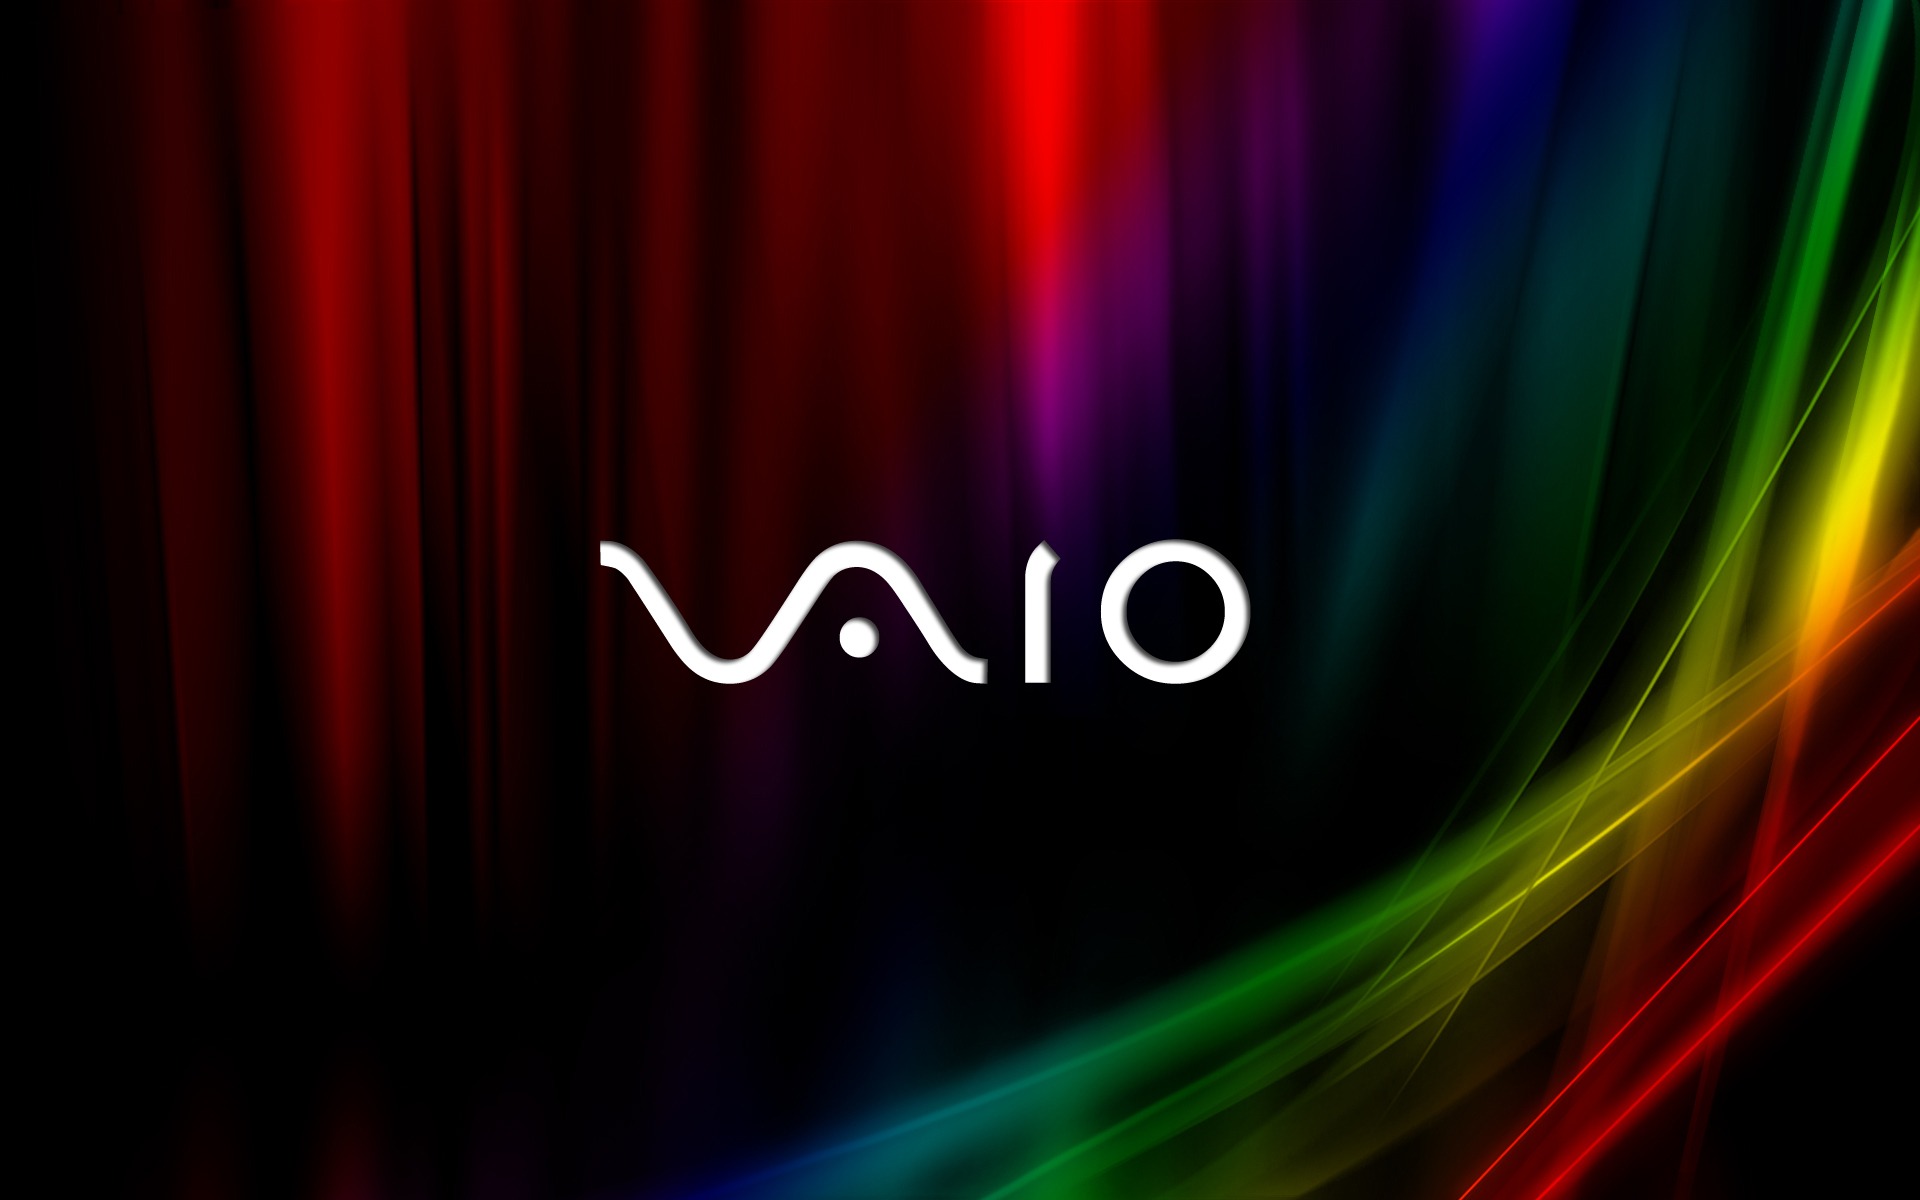 HD Sony Vaio Wallpapers amp Vaio Backgrounds For Free Download